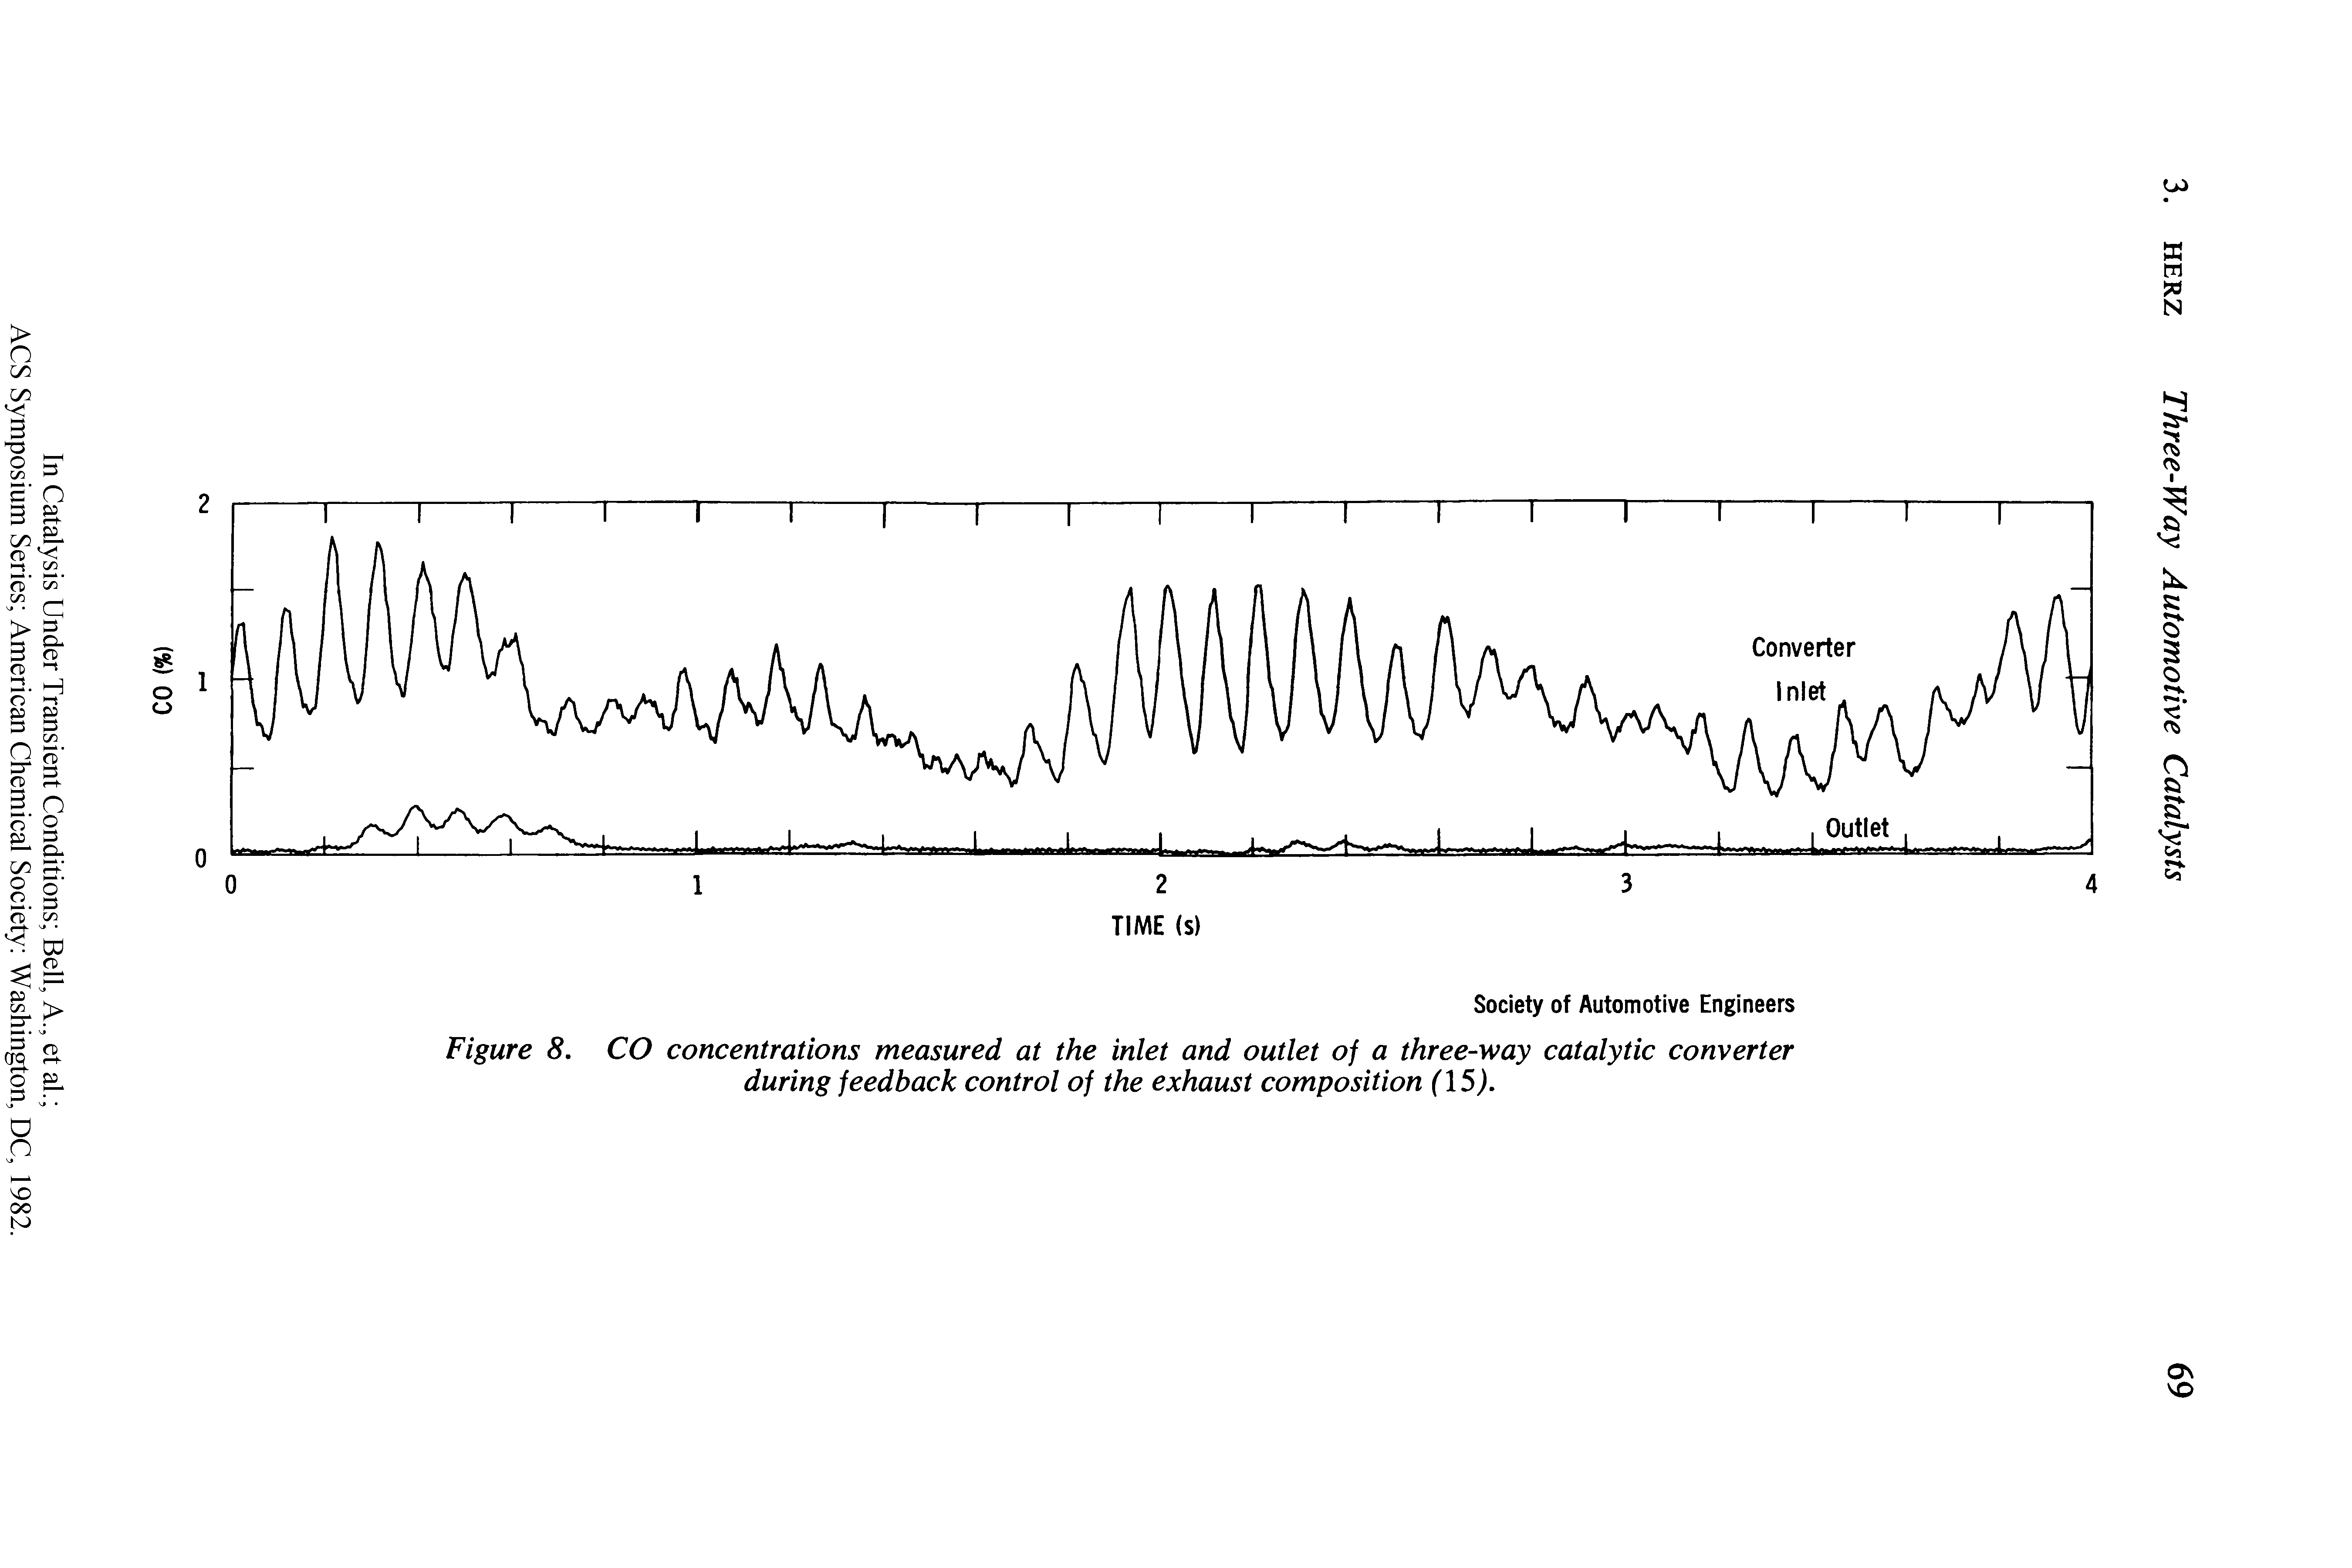 Figure 8. CO concentrations measured at the inlet and outlet of a three-way catalytic converter during feedback control of the exhaust composition (15).